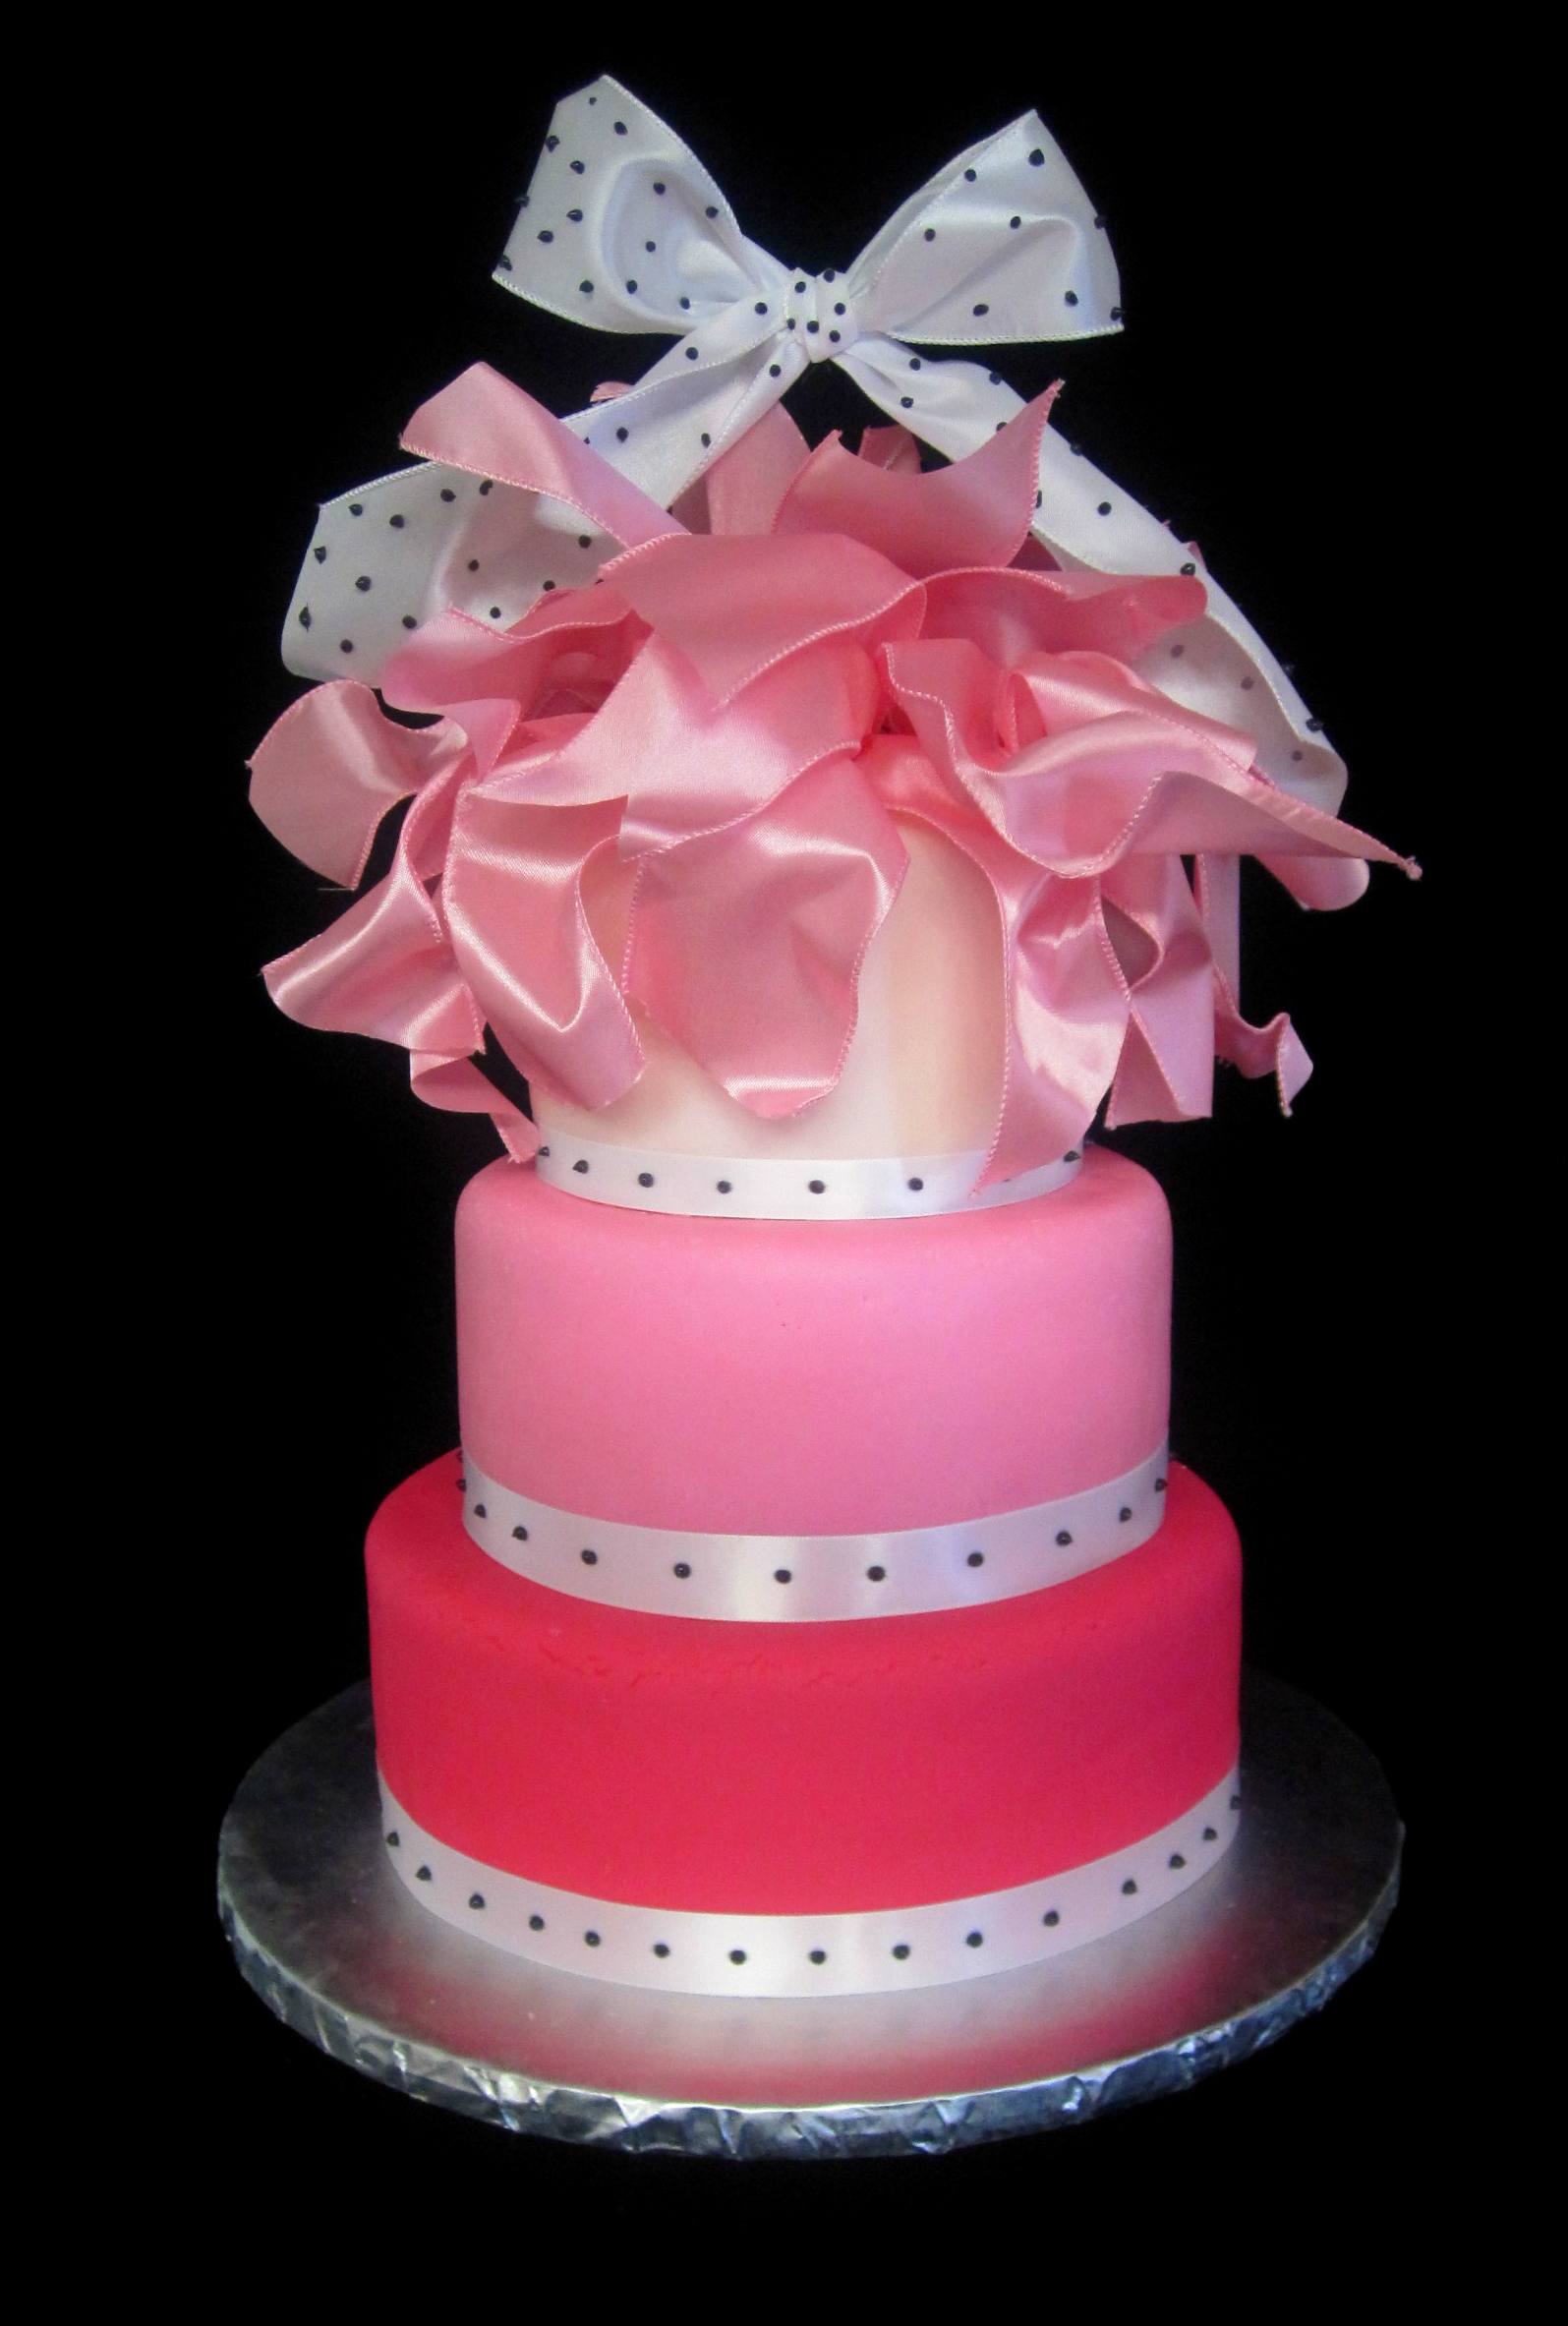 Pink Baby Shower Cake with Black and White Polka Dots Danville, KY ...